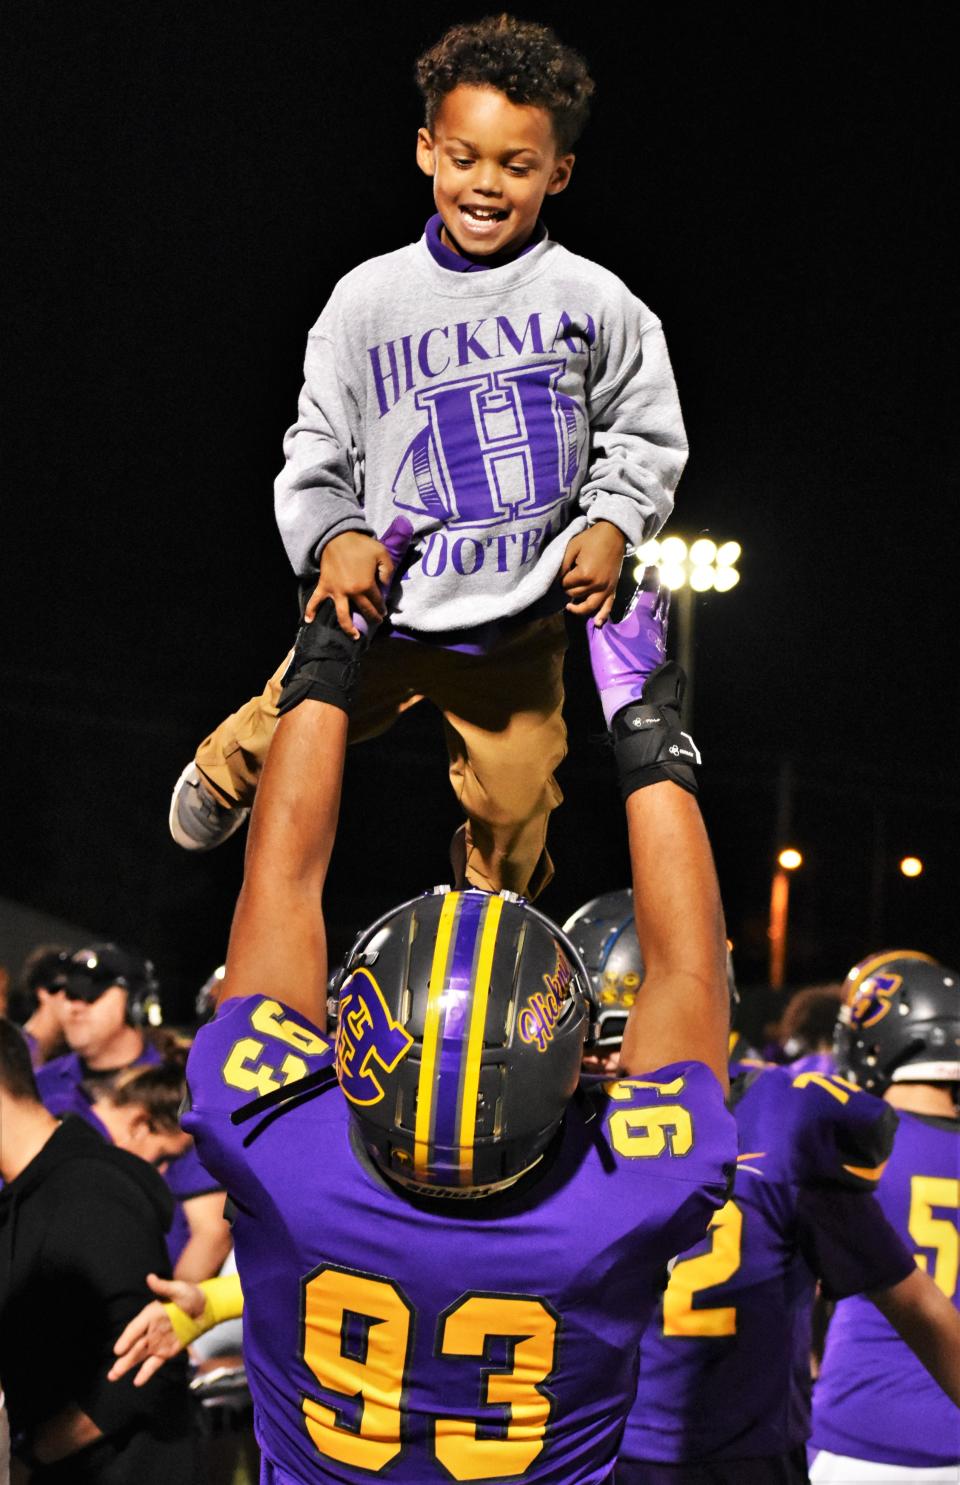 Hickman defensive tackle An'Davante Bussey (93) raises one of Kewpies' coach Cedric Alvis's sons during at timeout on the sidelines of Hickman's game against Belleville West at Hickman High School on Oct. 20, 2023, in Columbia, Mo.